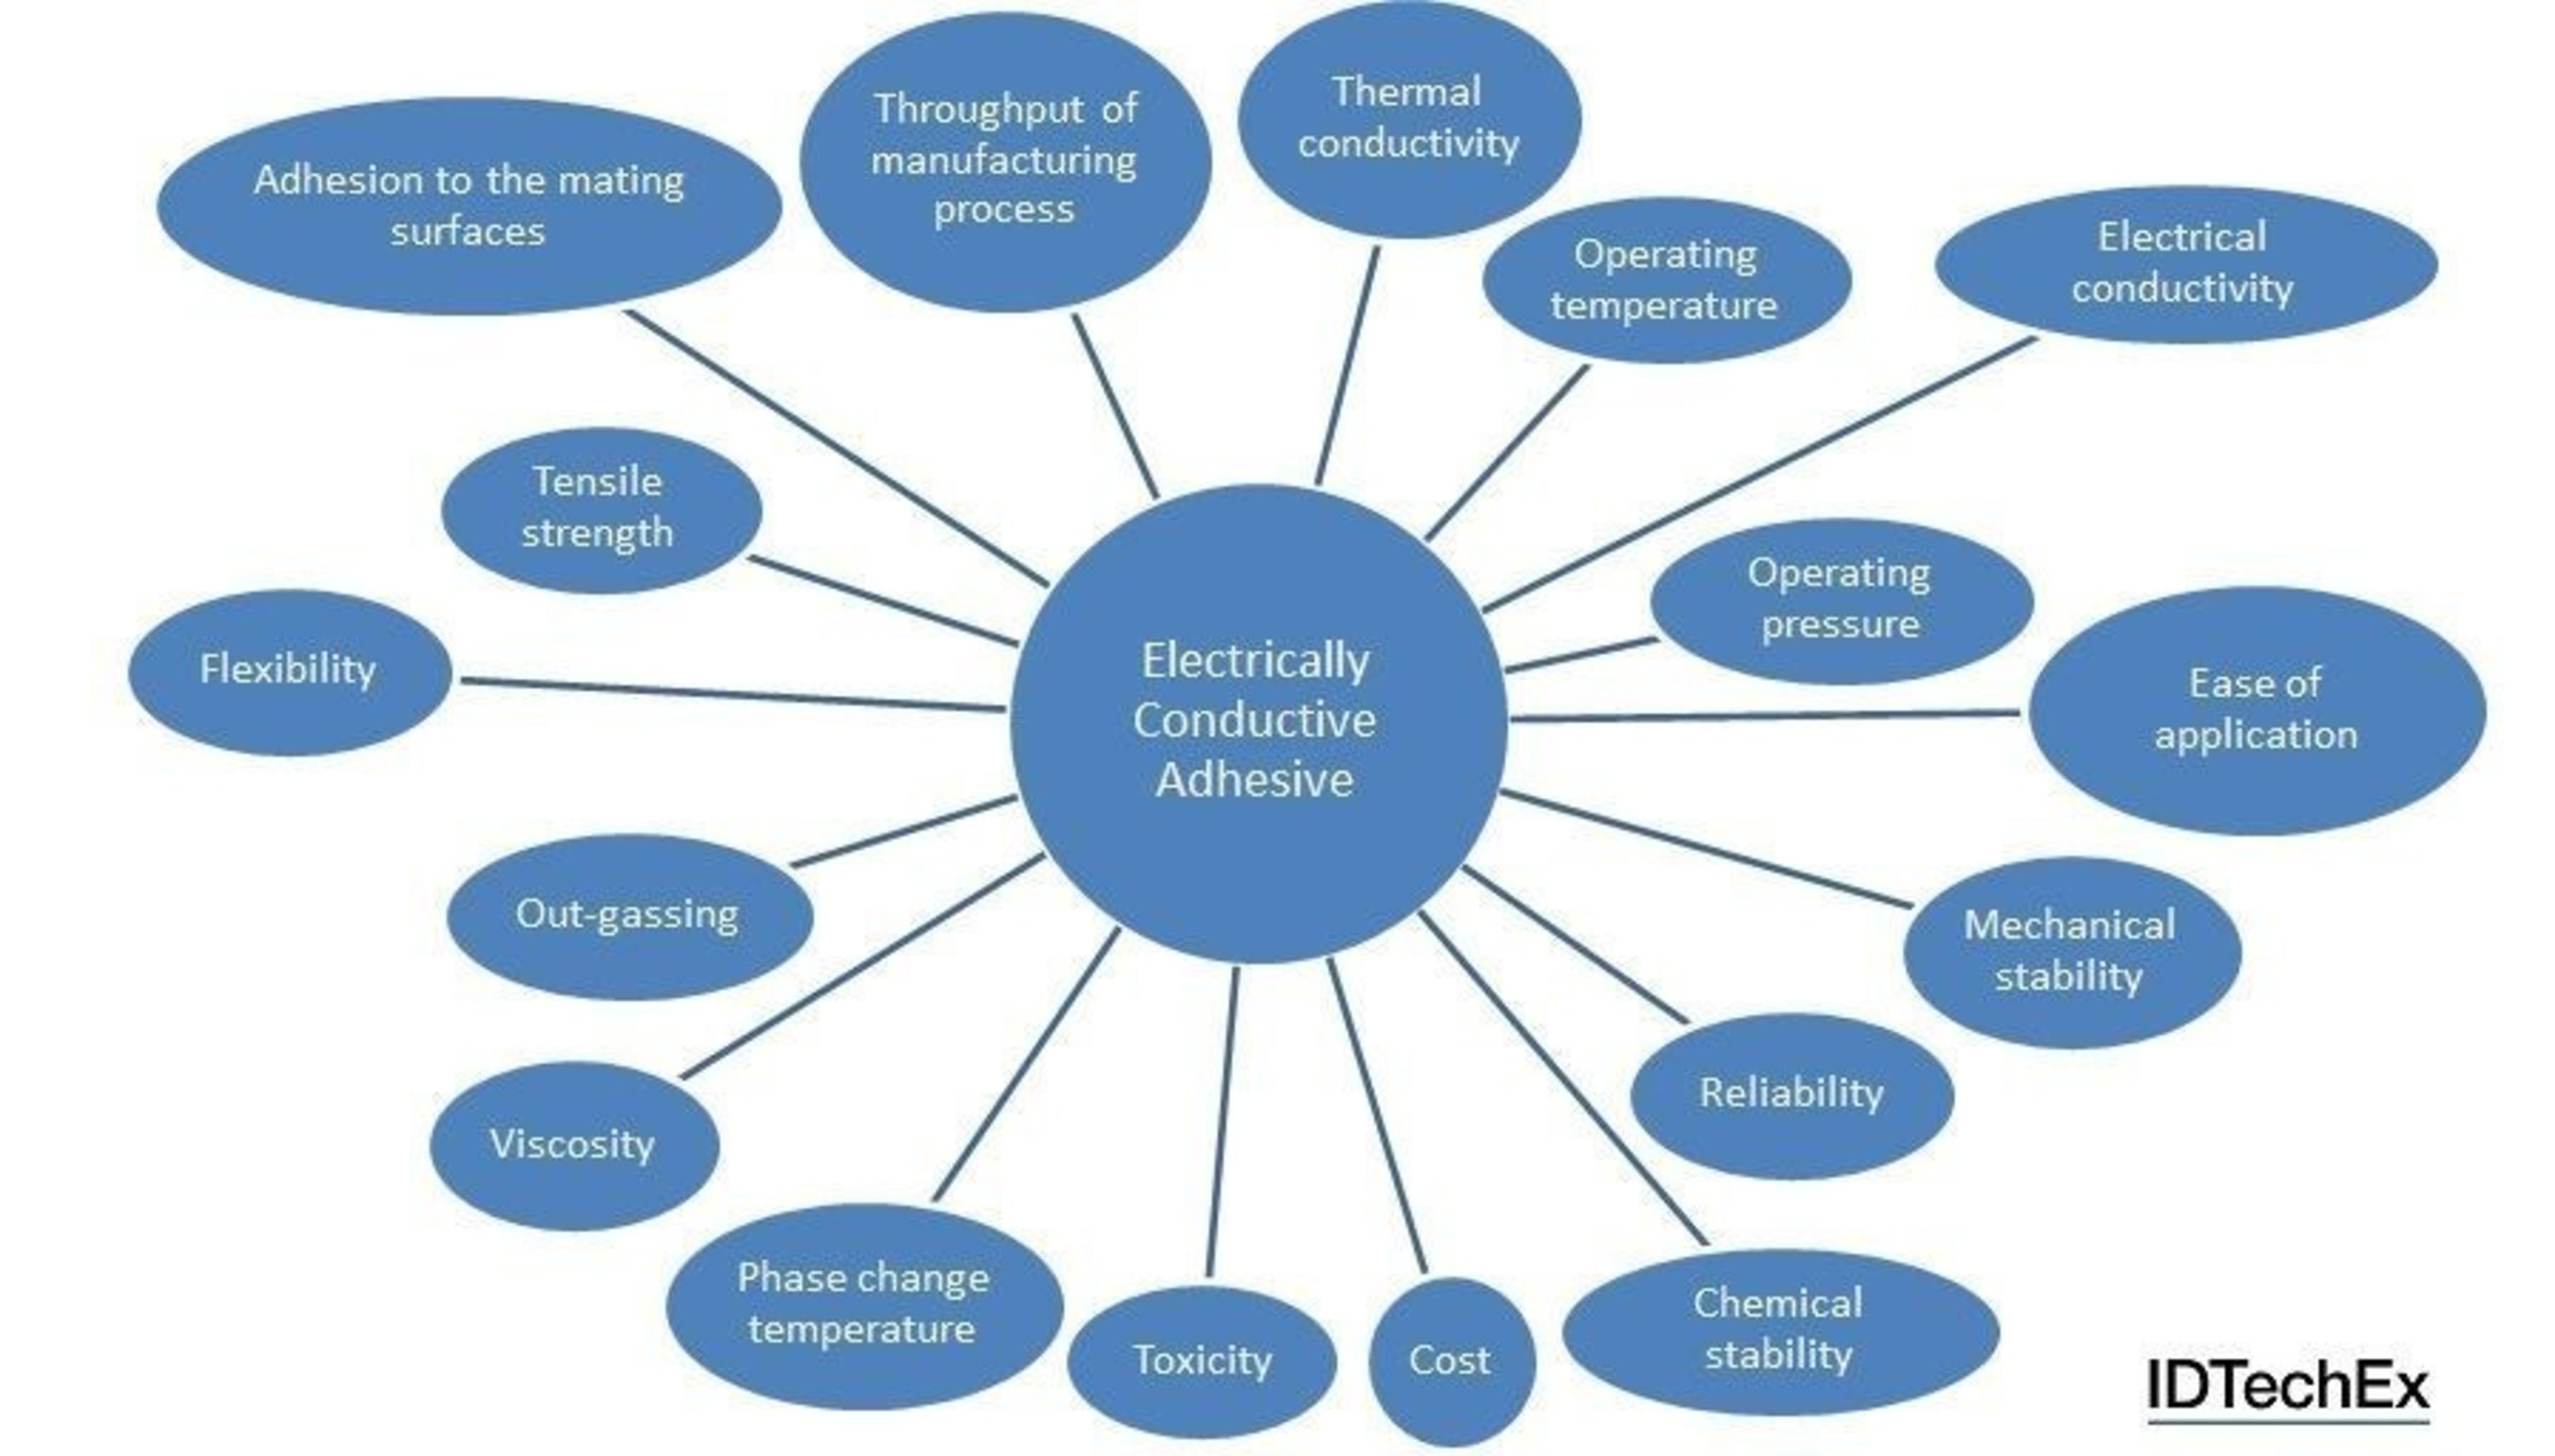 Figure 1: Diagram showing some of the most important parameters to consider when choosing an electrically conductive adhesive. Source: IDTechEx Research report "Electrically Conductive Adhesives 2016-2026" (www.IDTechEx.com/adhesives). (PRNewsFoto/IDTechEx Research)